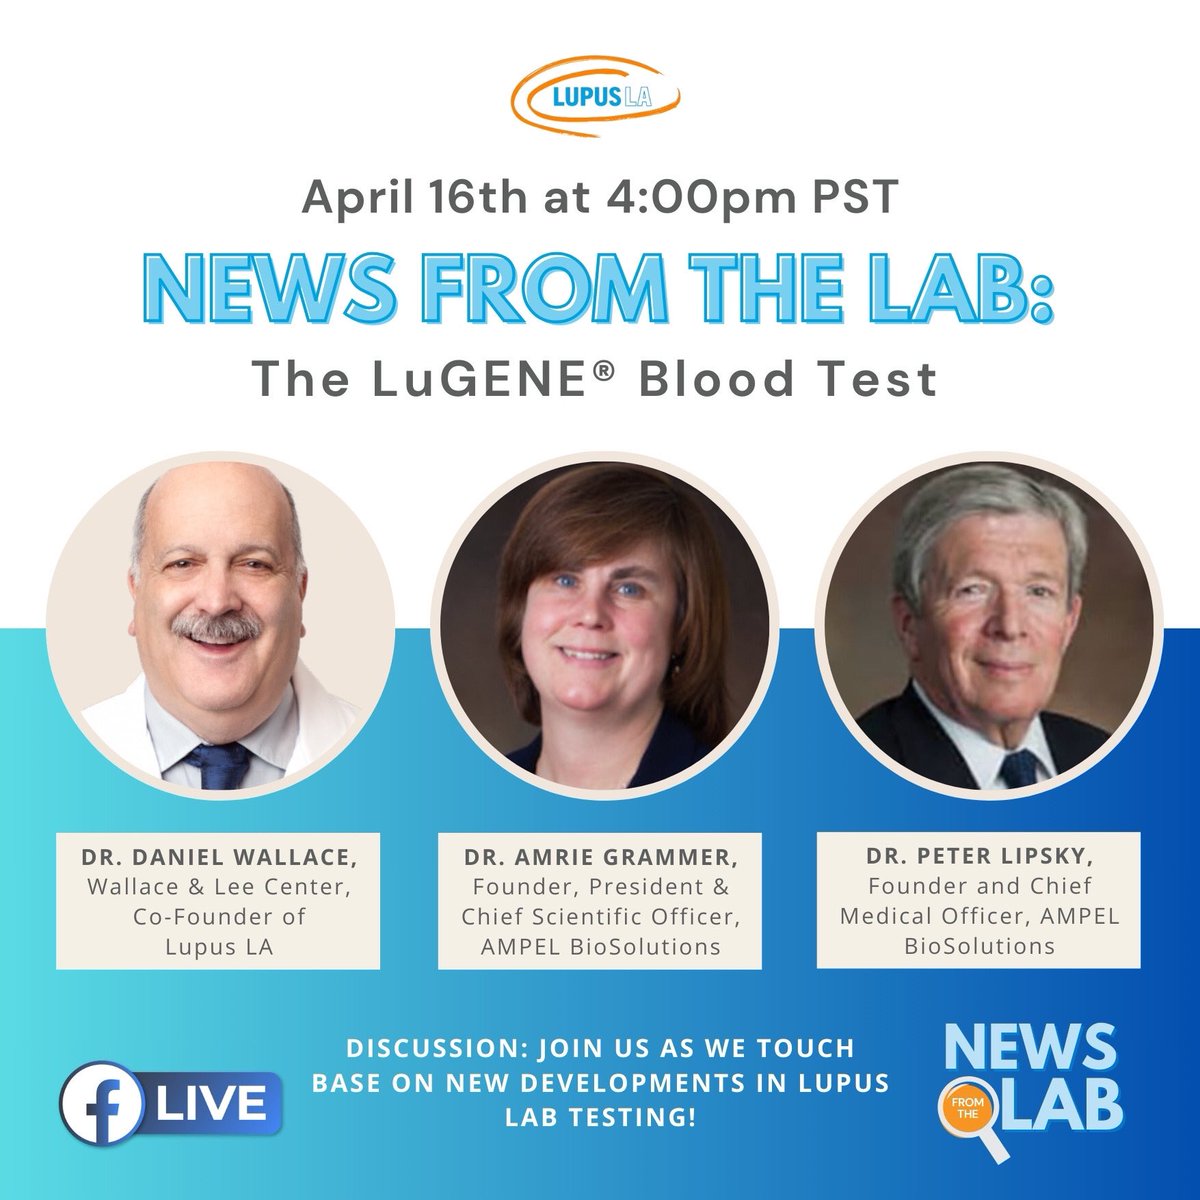 🔬 #NewsFromTheLab Alert! 📣 Discover the LuGENE® Blood Test on April 16th, 4pm PST - a game-changer in predicting lupus flares & drug targets. Hear from Dr. Grammer, Dr. Lipsky & celebrity rheumatologist Dr. Wallace. Tap the live video on 4/16 at 4pm PST on Facebook to join!